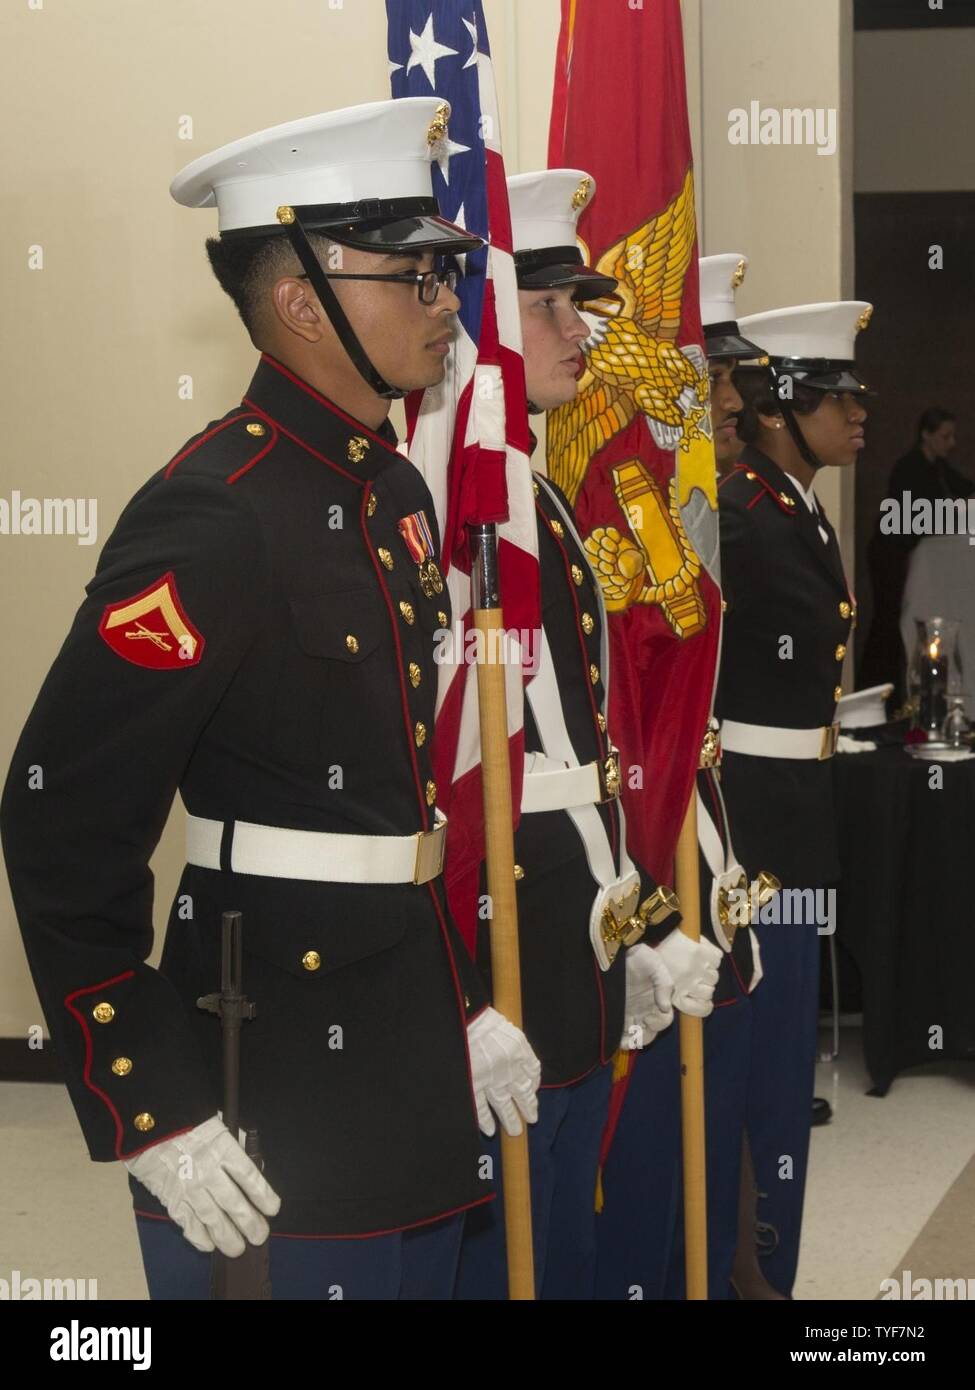 U.S. Marines with the Marine Corps Air Station New River (MCAS) New River color guard stand at attention during the Headquarters and Headquarters Squadron, MCAS New River 241st Marine Corps Birthday Ball at the Crystal Coast Civic Center, Morehead City, N.C., Nov. 5, 2016. The Marine Corps has carried 241 years of traditions, values and standards since its establishment in 1775. Stock Photo